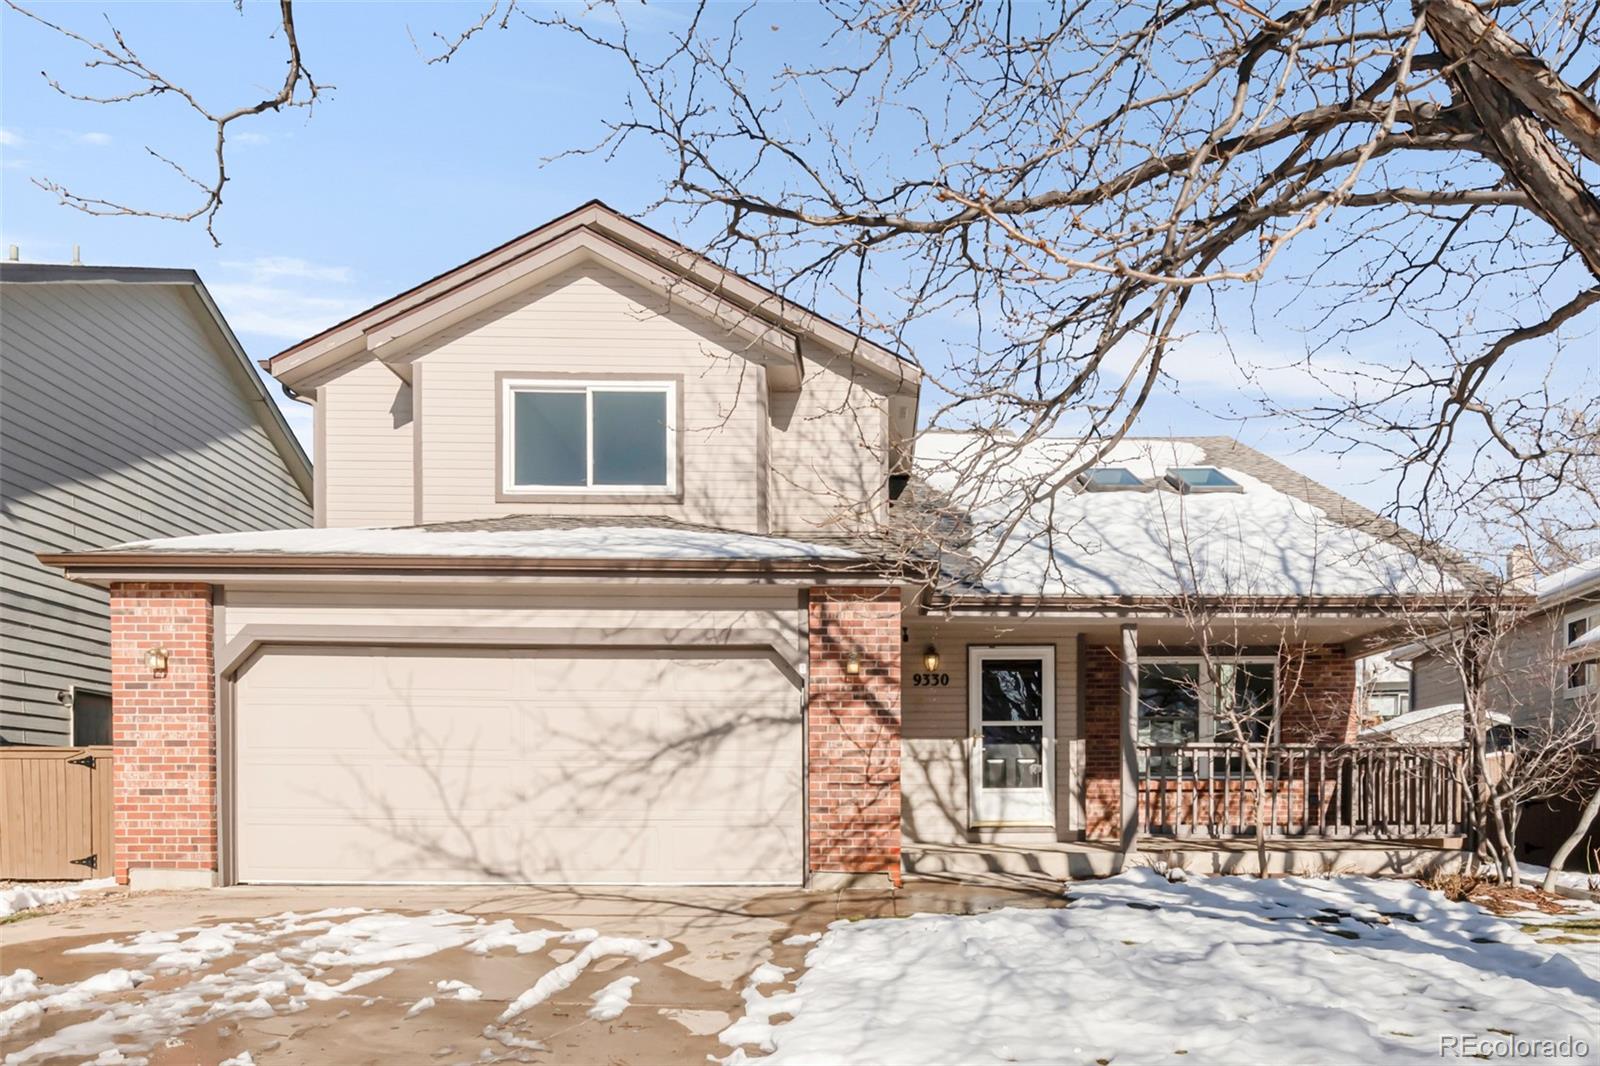 Report Image for 9330  Waterford Court,Highlands Ranch, Colorado